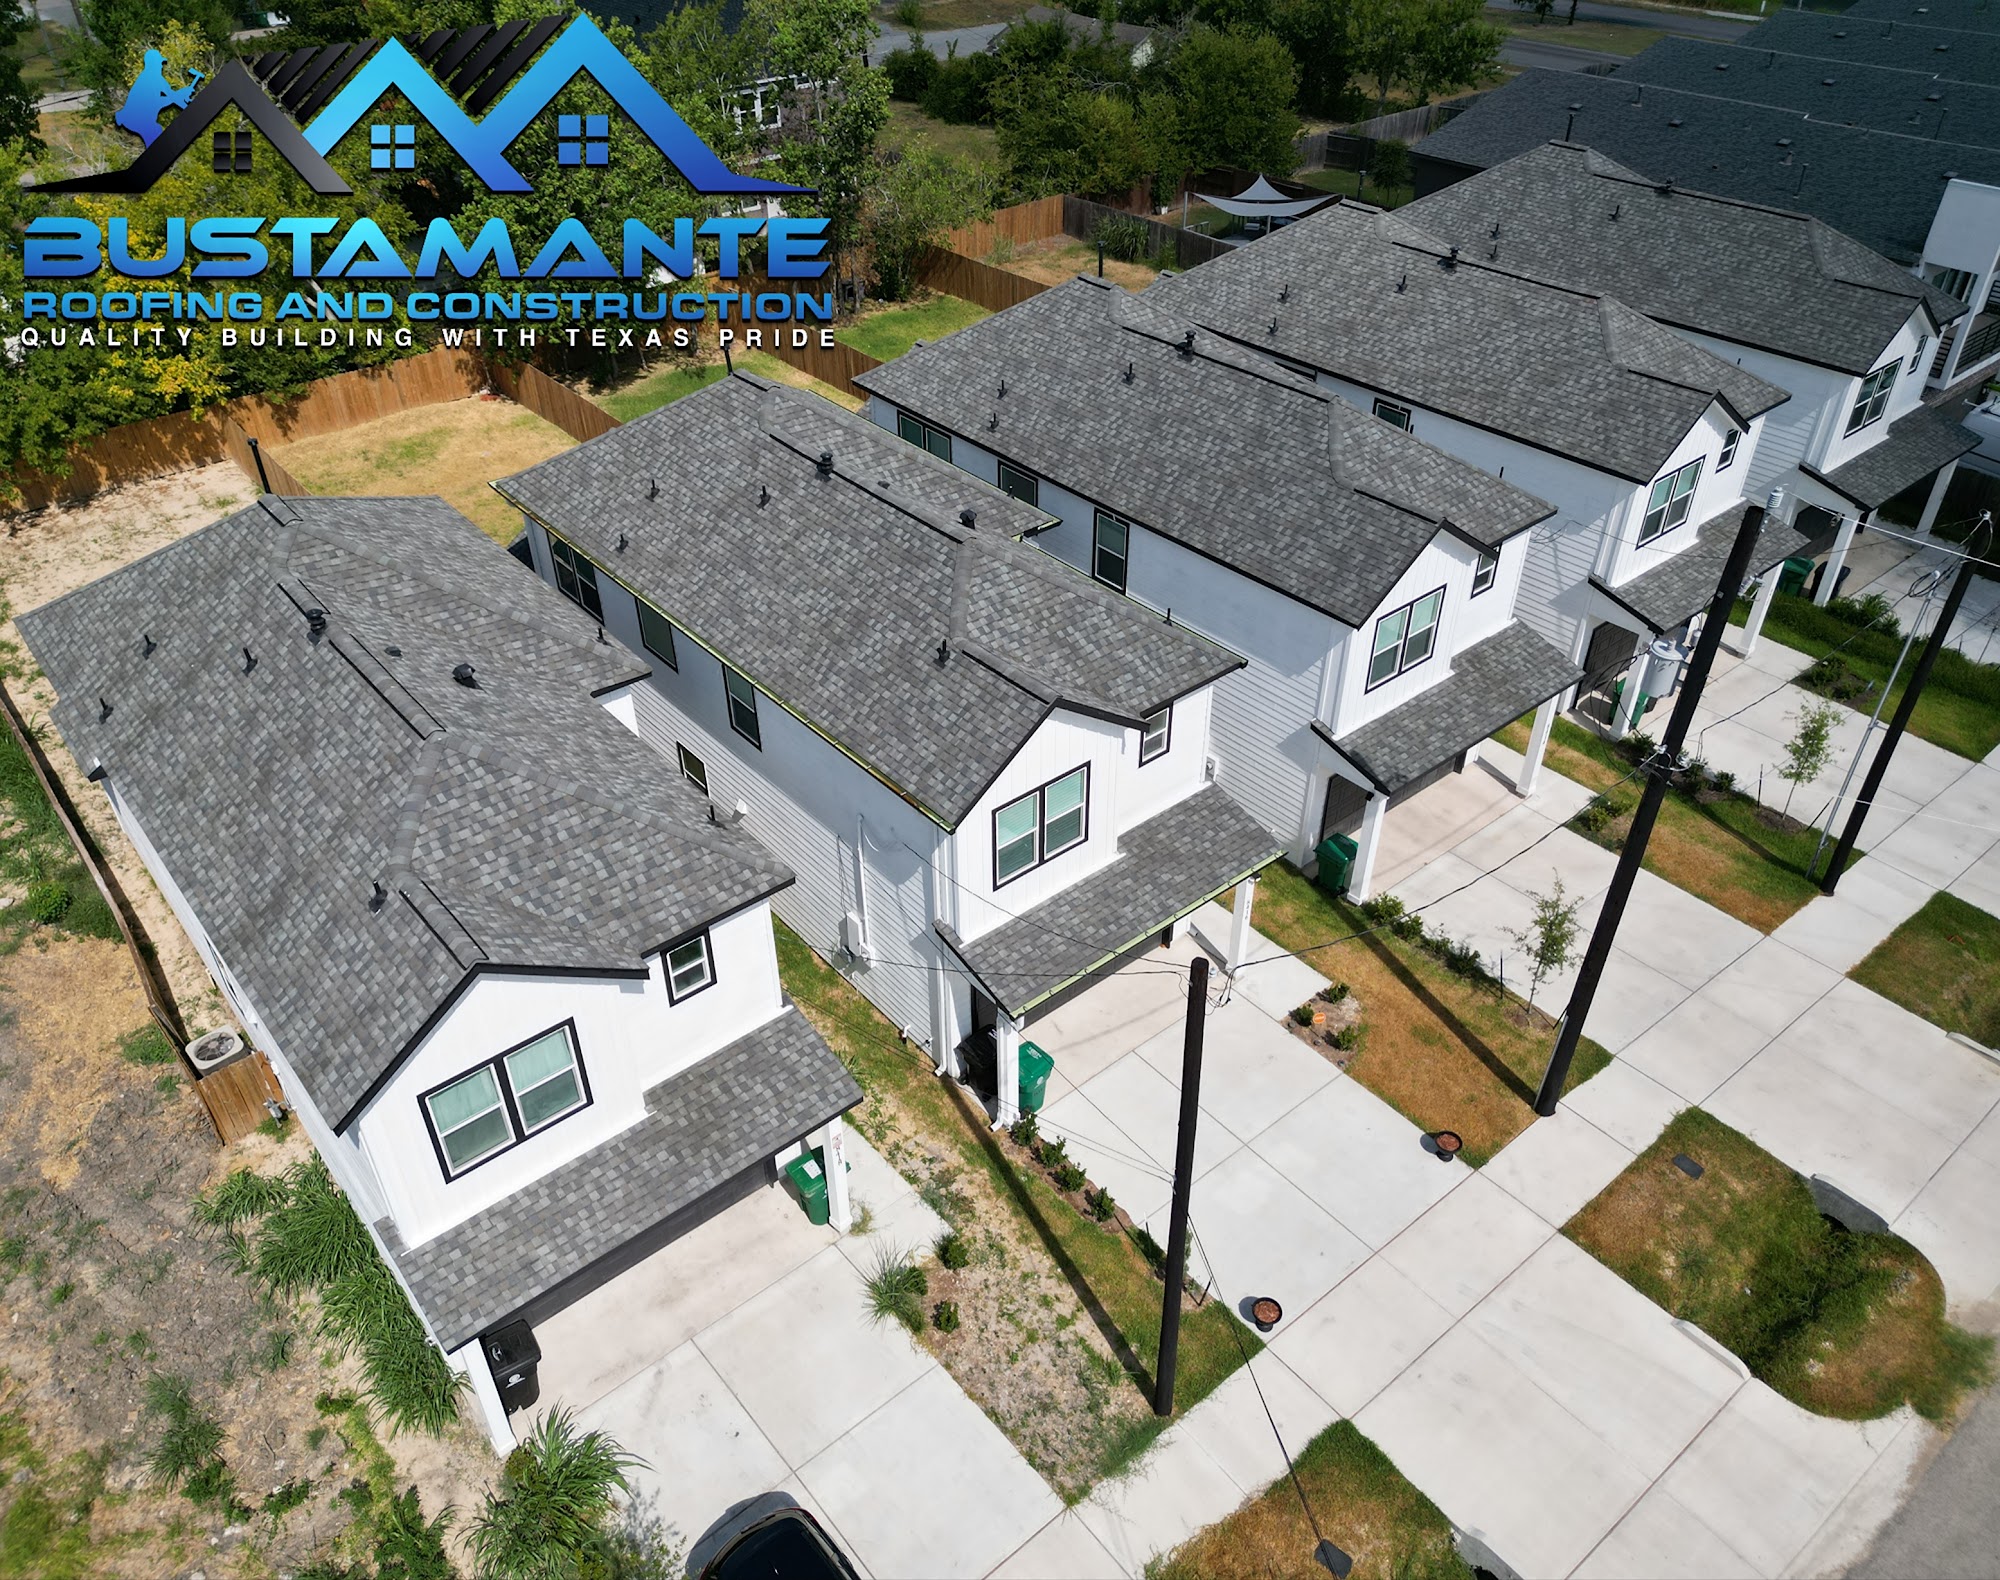 Bustamante Roofing and Construction